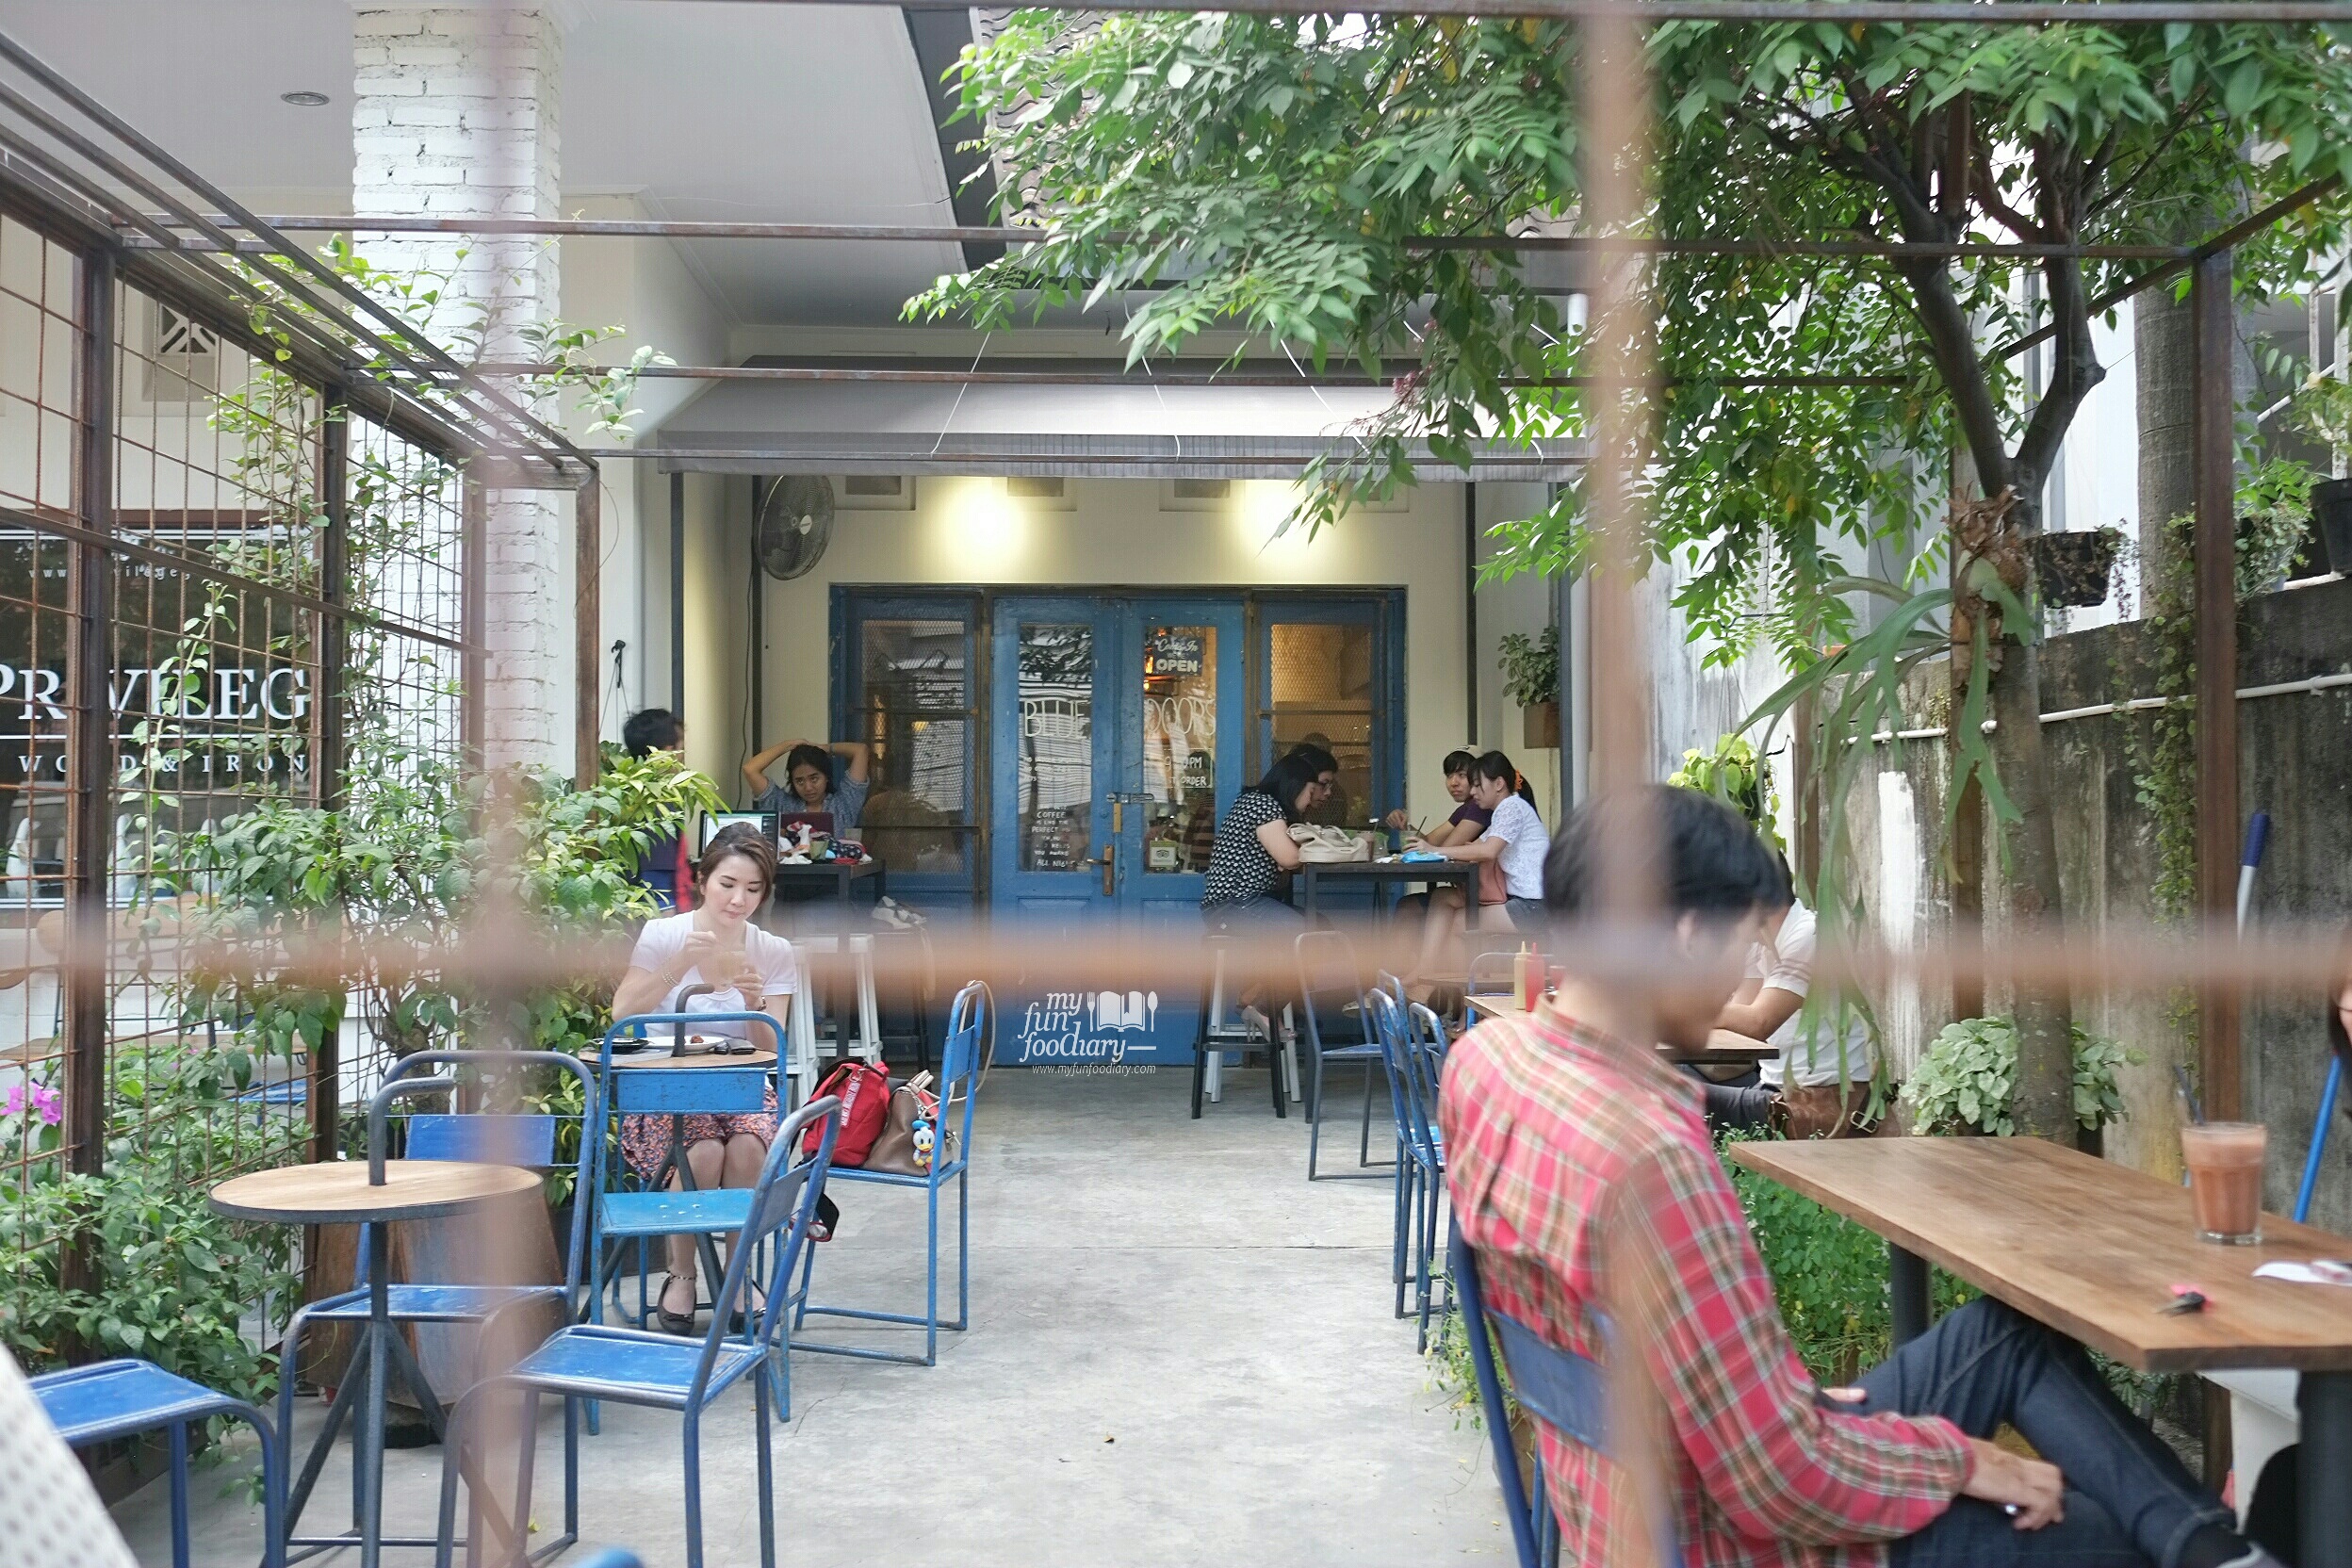 Outdoor Area at Blue Doors Bandung by Myfunfoodiary